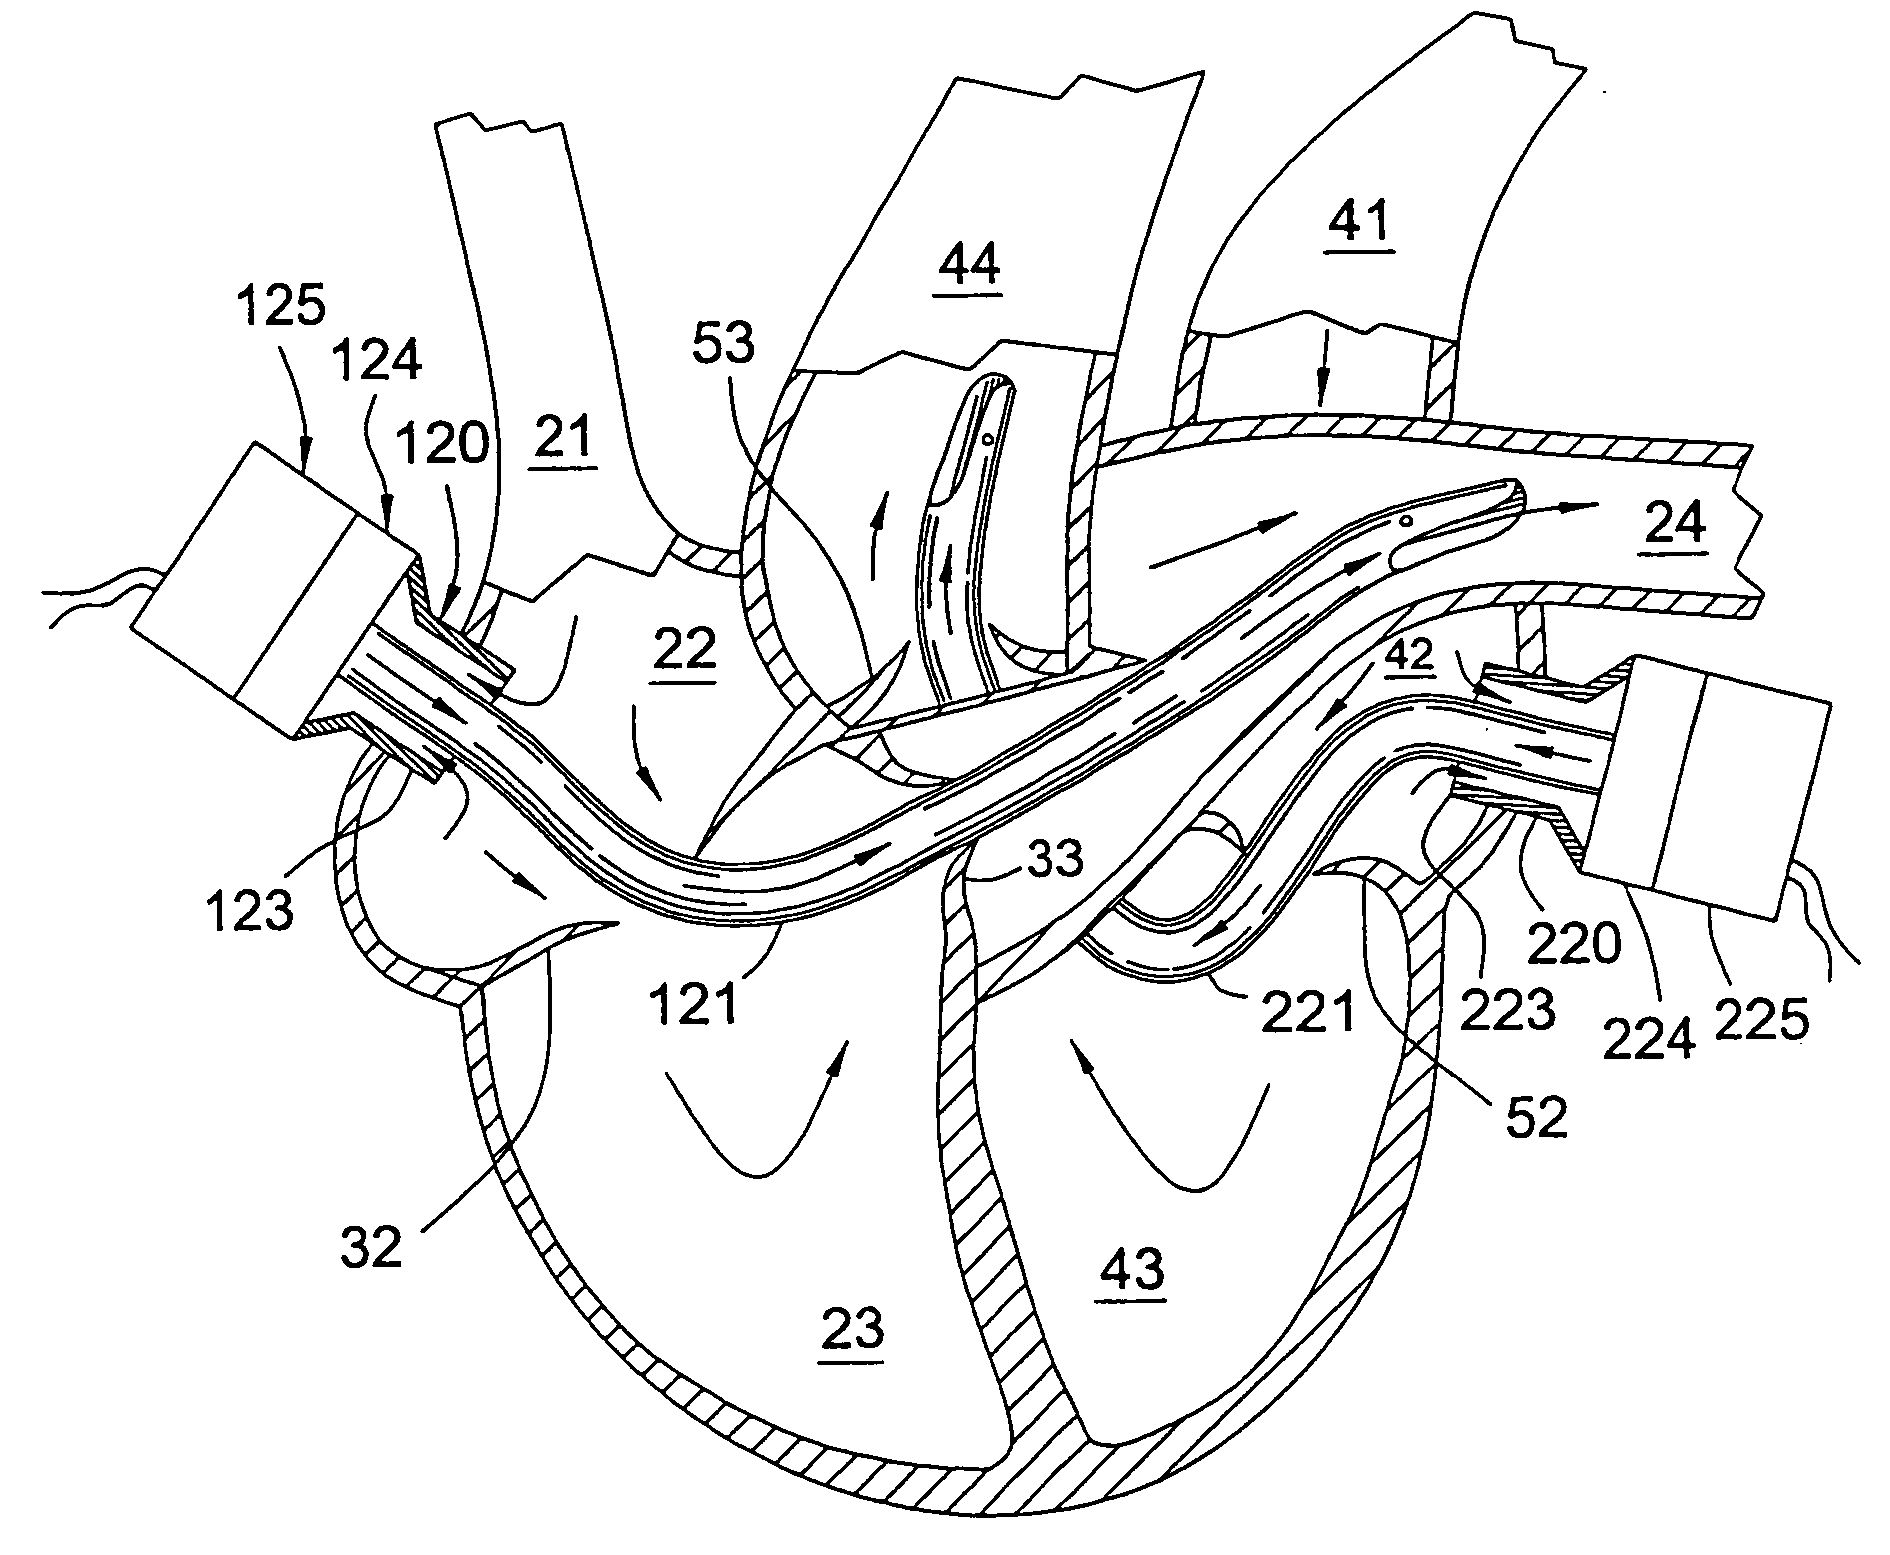 Pulmonary and circulatory blood flow support devices and methods for heart surgery procedures